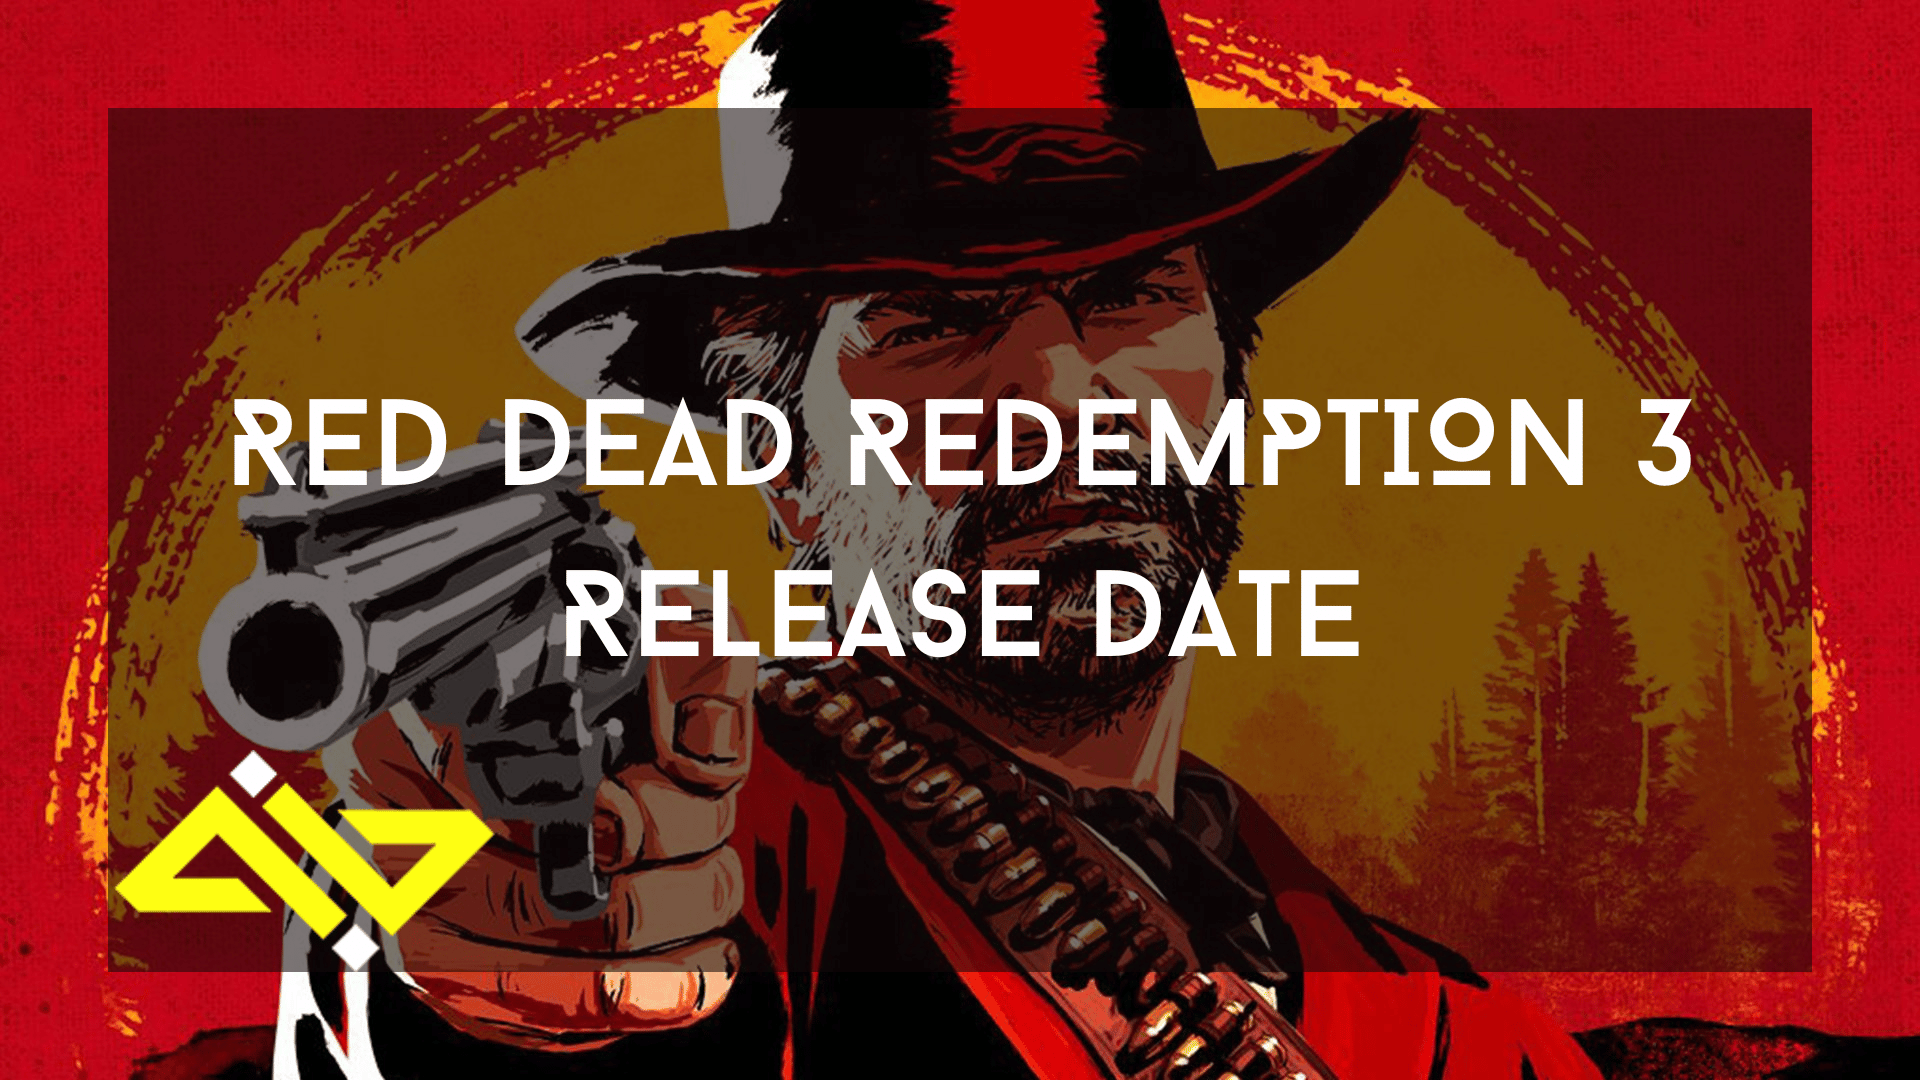 Red Dead Redemption Date, & Rumors